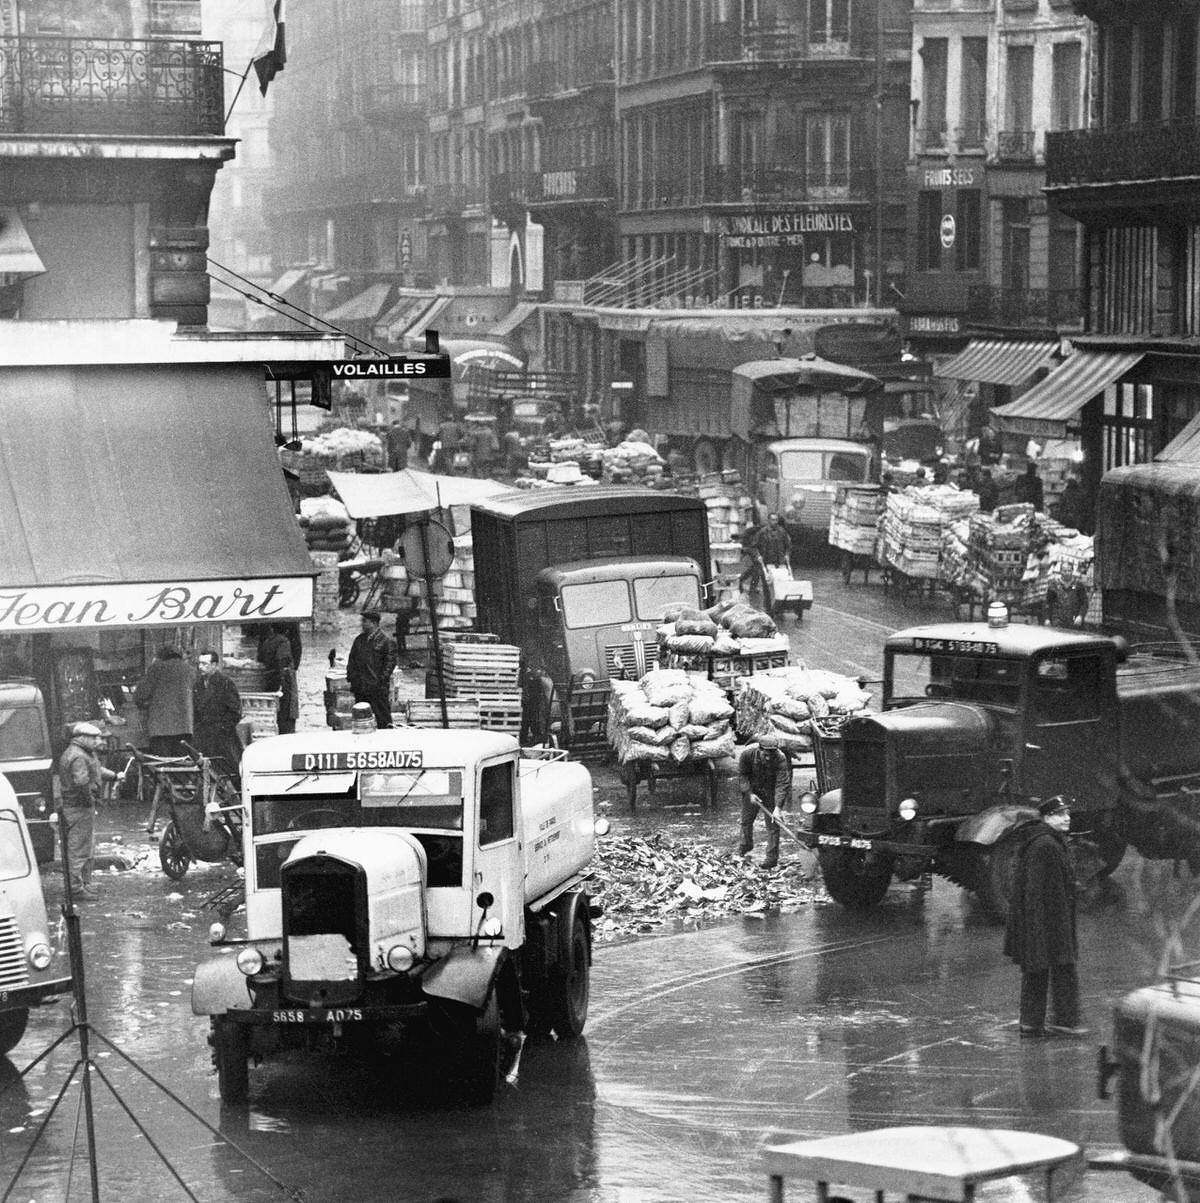 Busy street scene of the central market place "Les Halles" and vicinity, 1950s